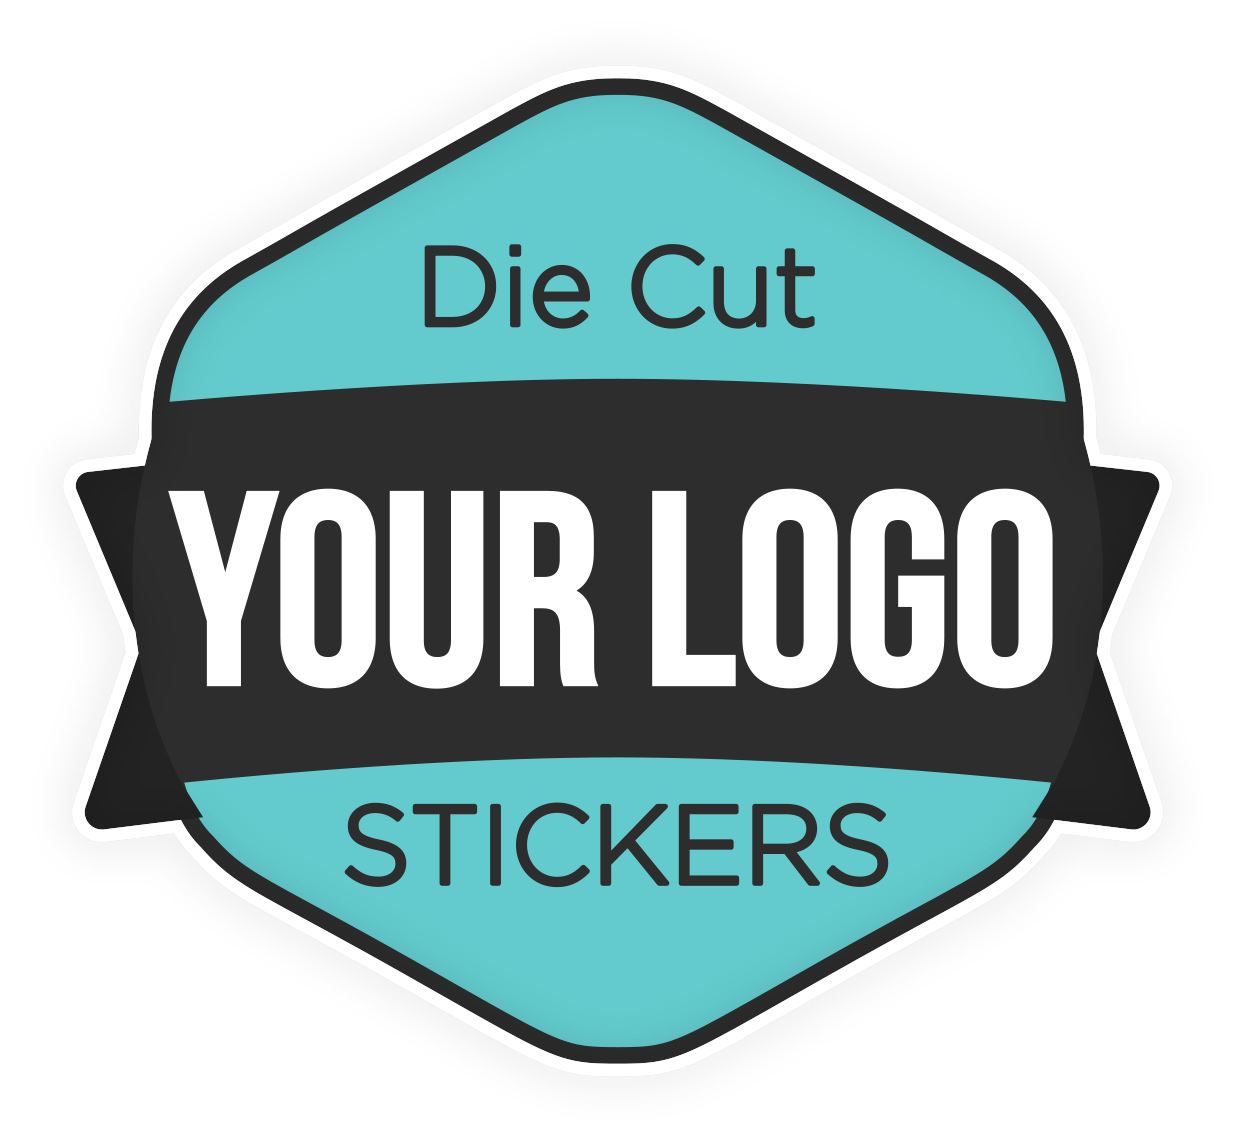 7 Effective Ways To Use Die-Cut Logo Stickers for Your Small Business